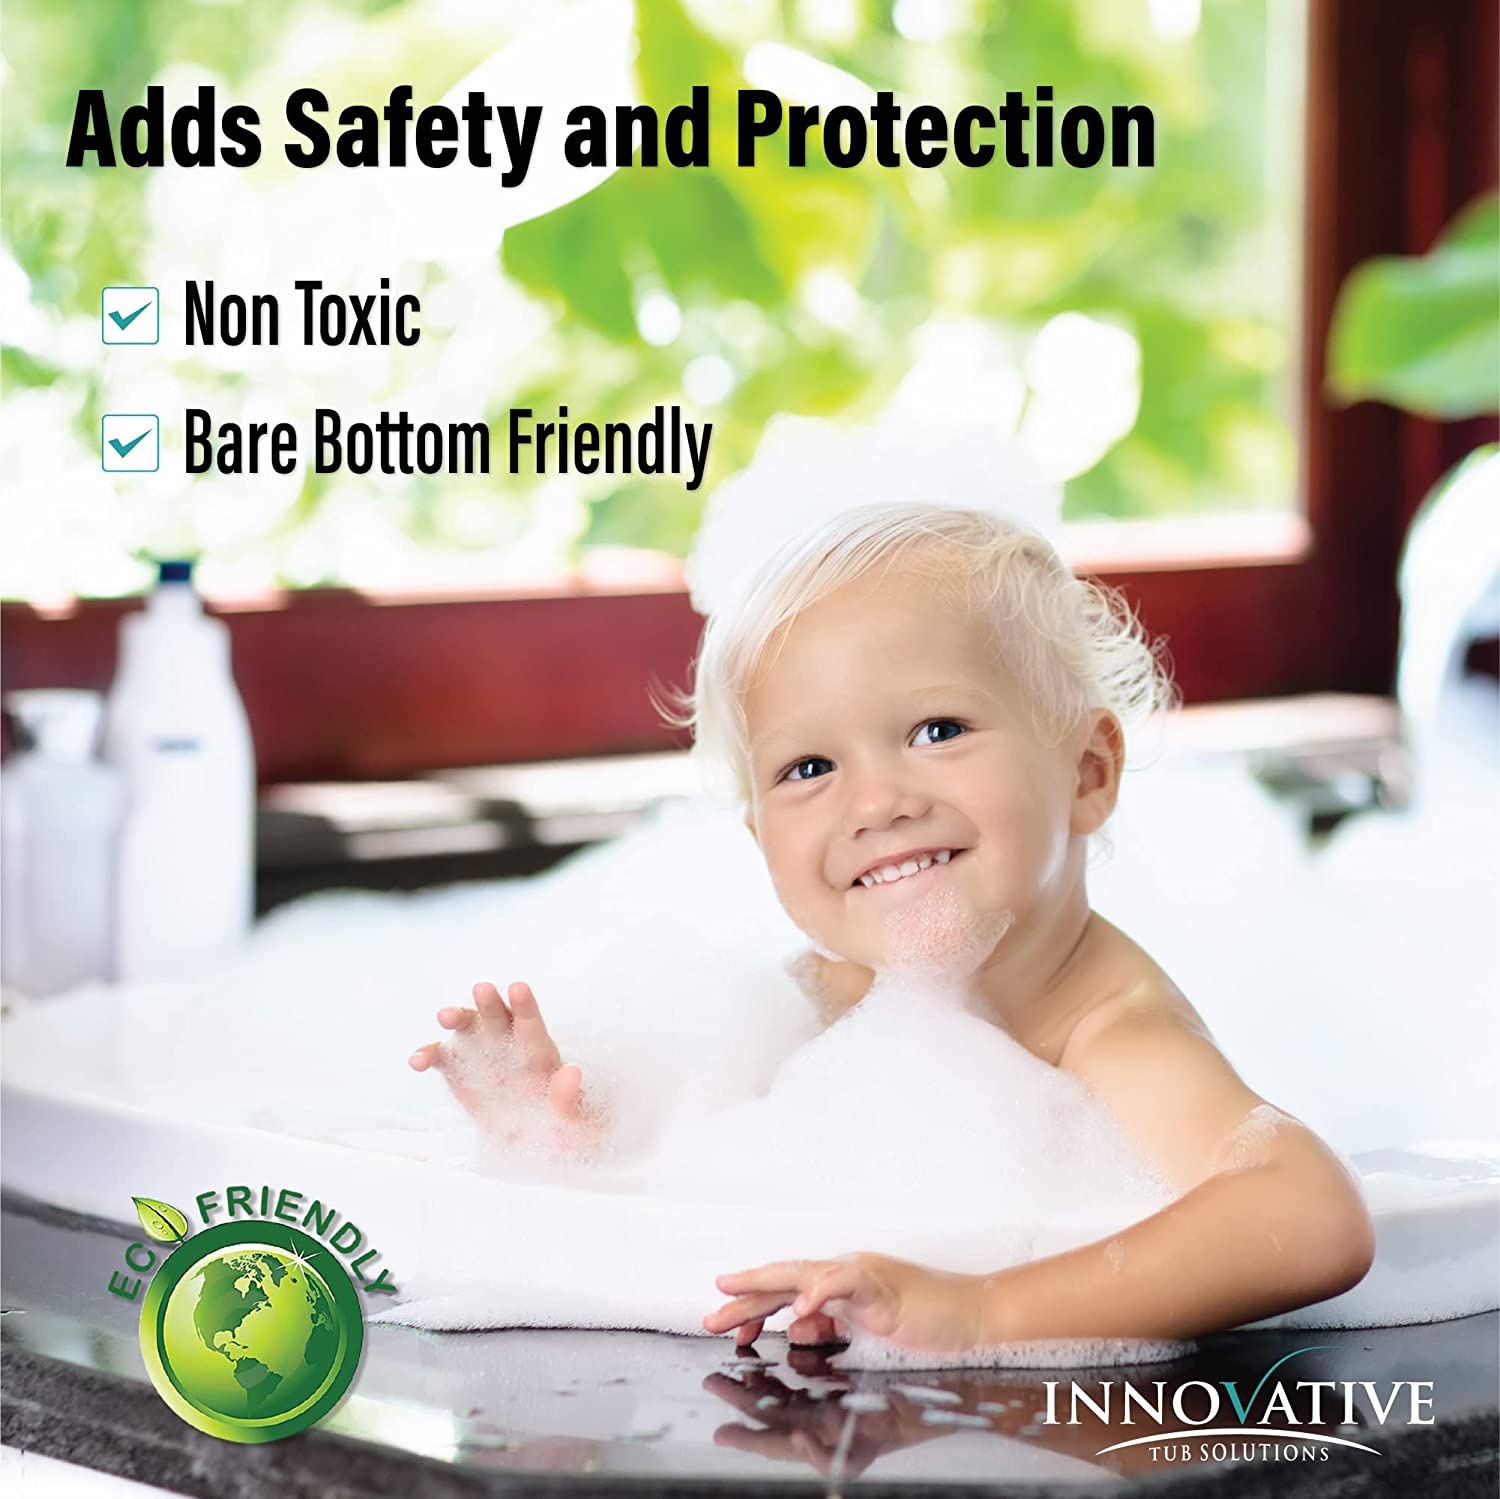 https://www.innovativetubsolutions.com/wp-content/uploads/2019/06/add-safety-and-protection.jpg